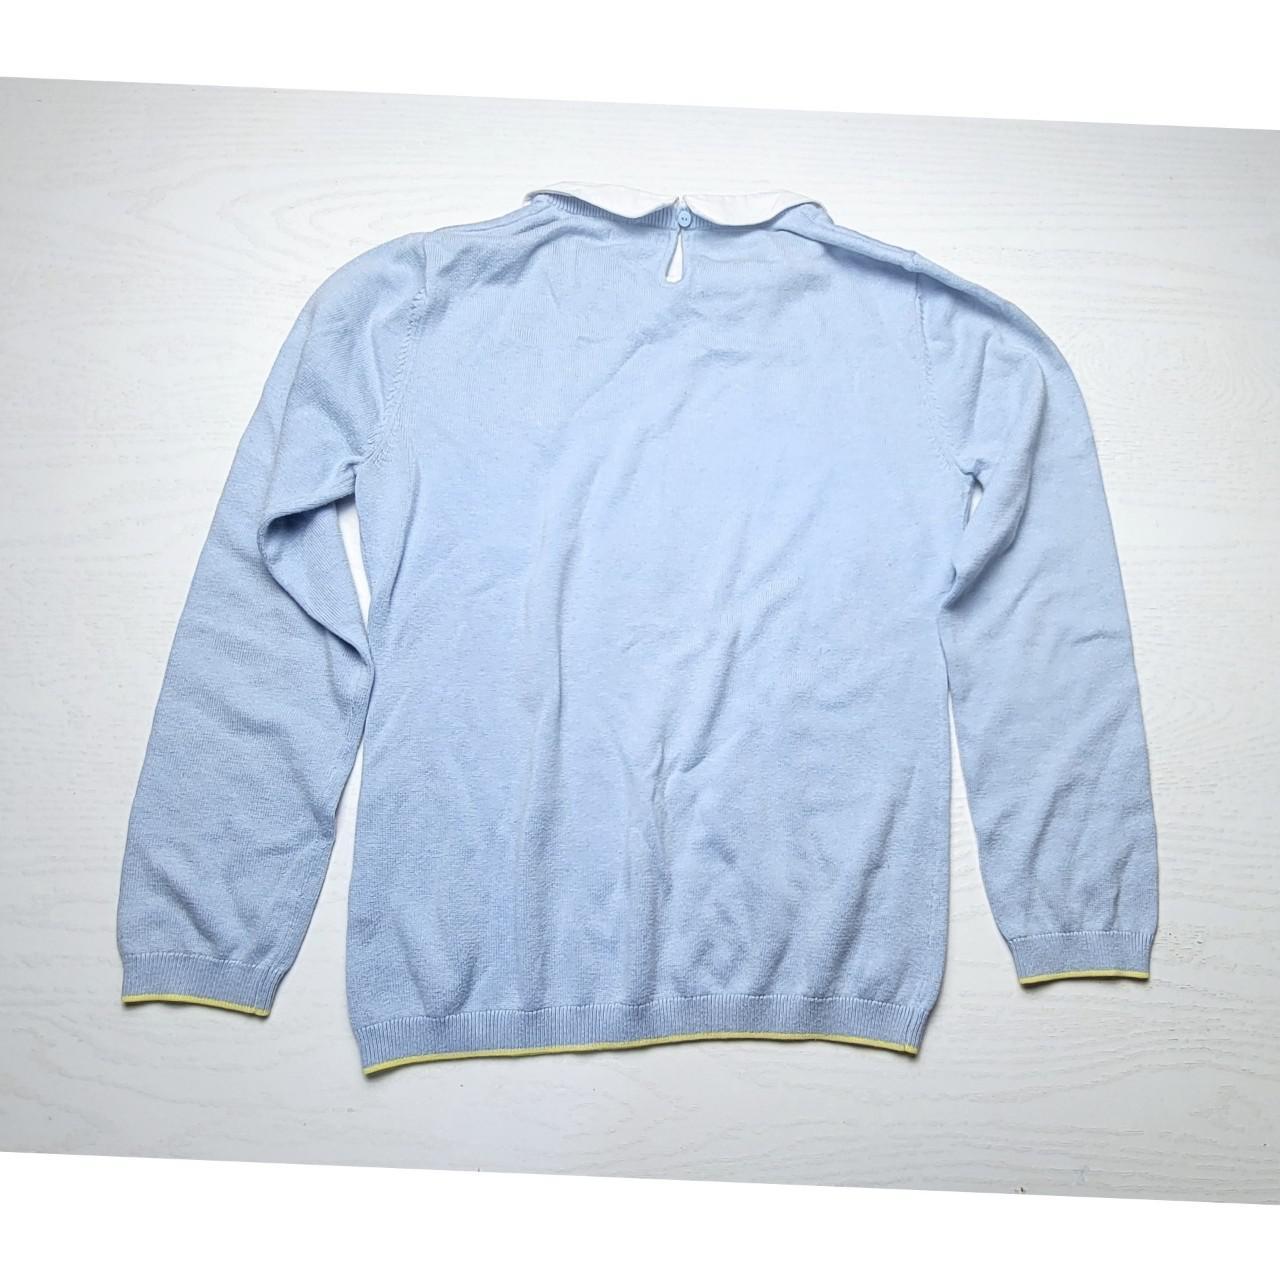 Product Image 3 - Blue Sweater Blouse

Absolutely adorable. A